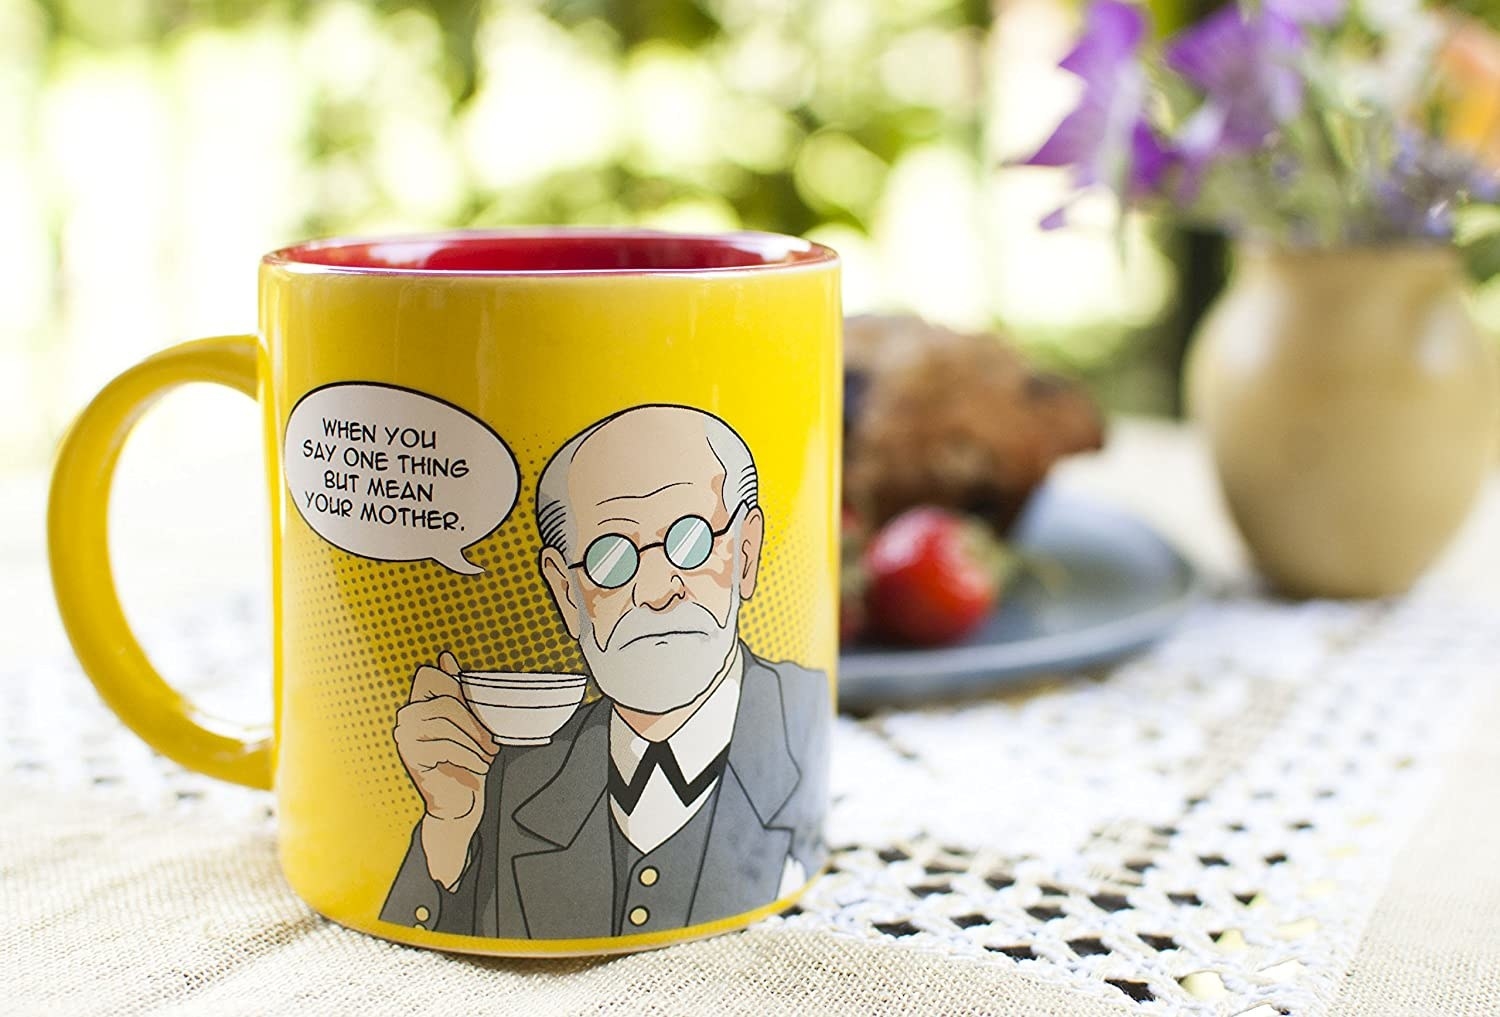 The mug with a comic rendition of Sigmund Freud holding a teacup, with a speech bubble saying, when you say one thing but mean your mother